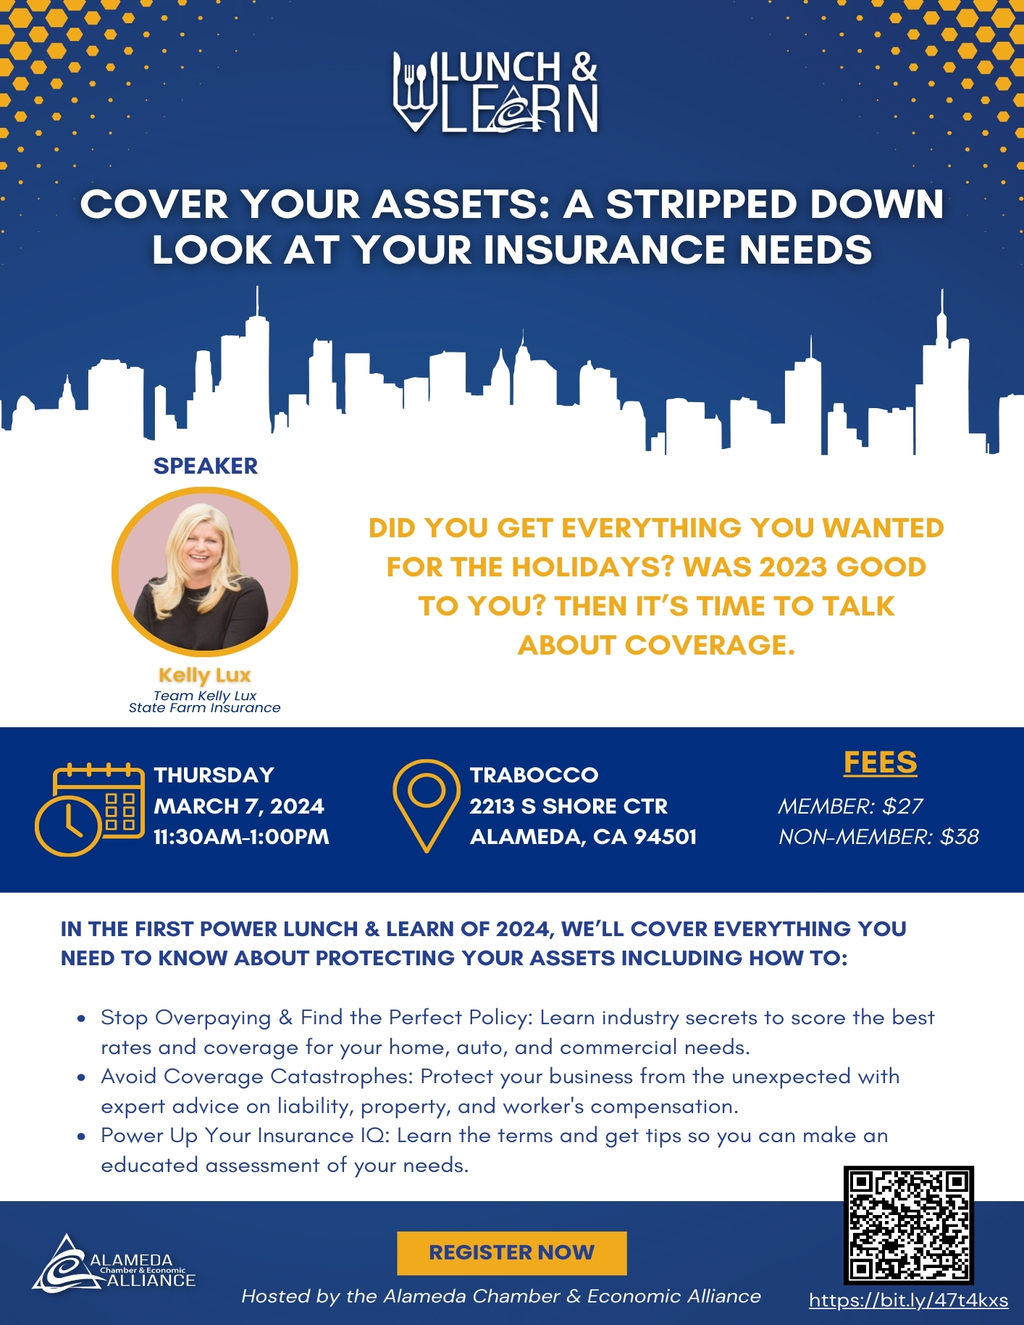 Alameda Chamber Of Commerce LUNCH   COVER YOUR ASSETS  A STRIPPED DOWN LOOK AT YOUR INSURANCE NEEDS promotion flier on Digifli com